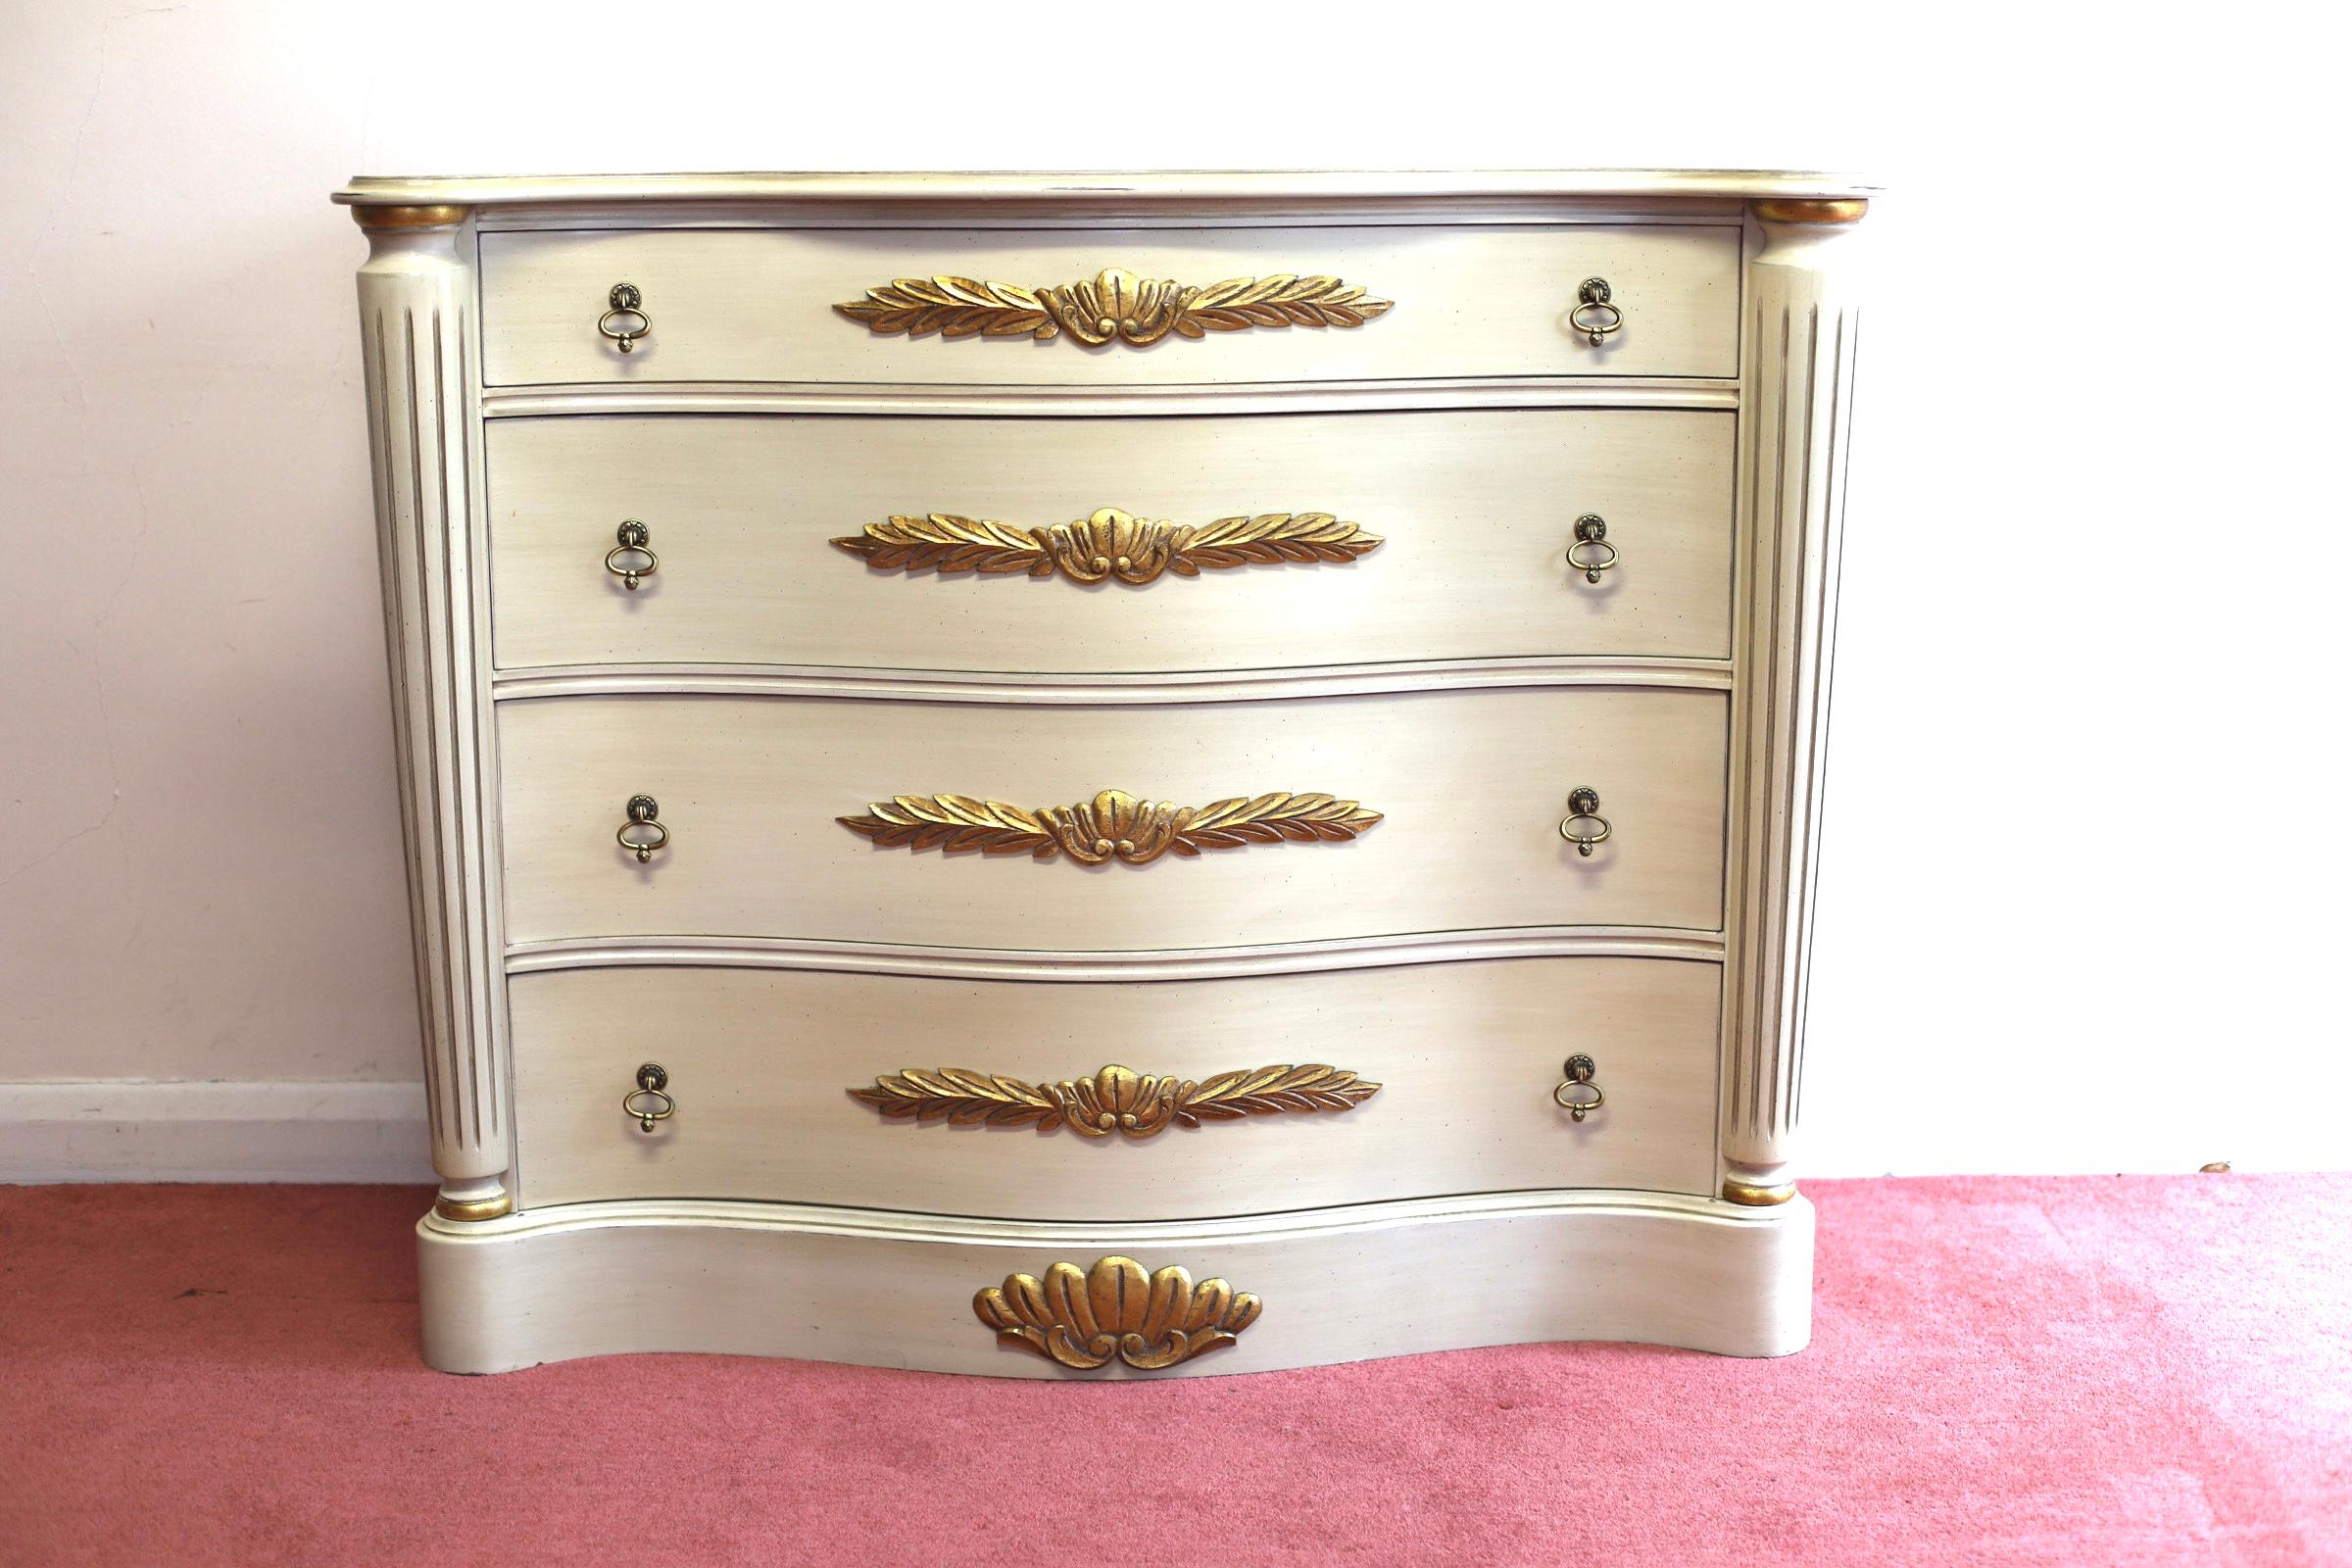 Lovelly Painted Chest Of 4 Drawers French Style , the beautiful white ash whith gold makes this vintage chest unique !
Don't hesitate to contact me if you have any questions.
Please have a closer look at the pictures because they form part of the